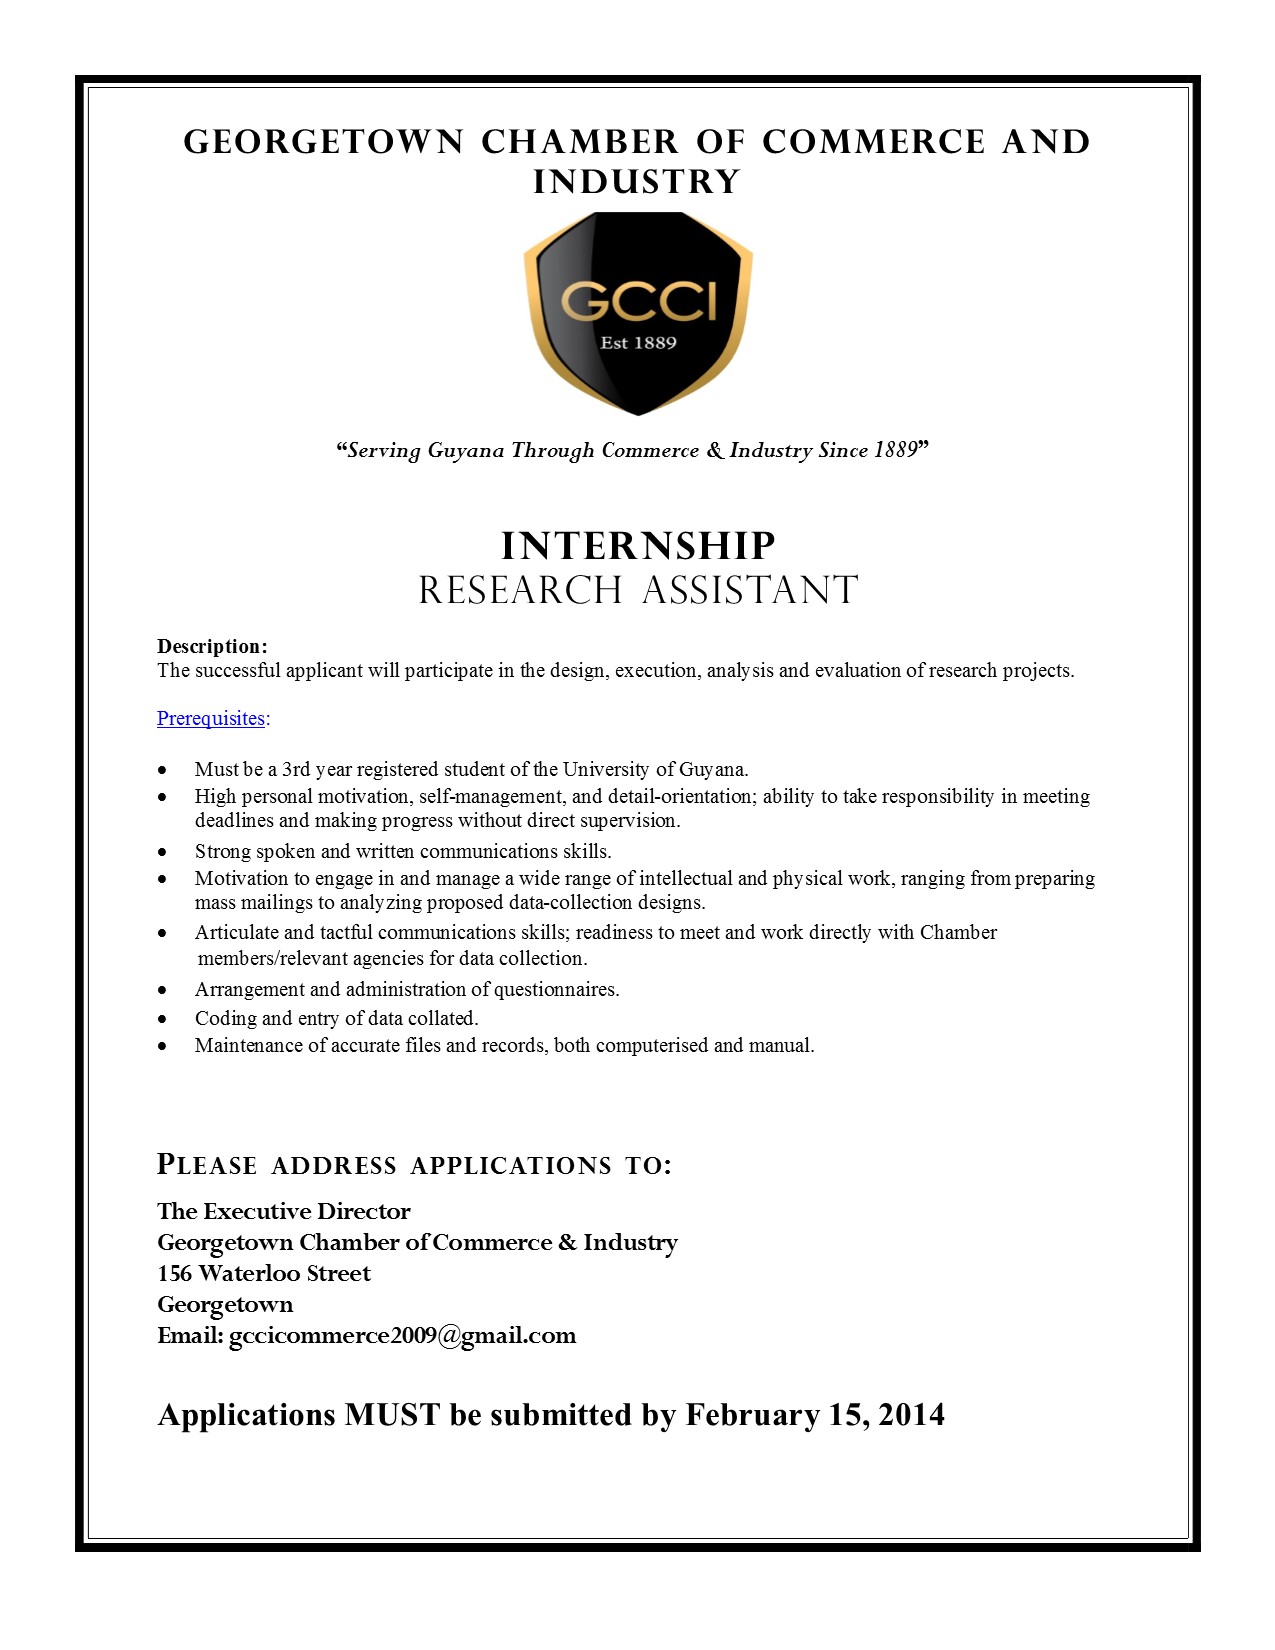 Internship Flyer – Georgetown Chamber of Commerce & Industry